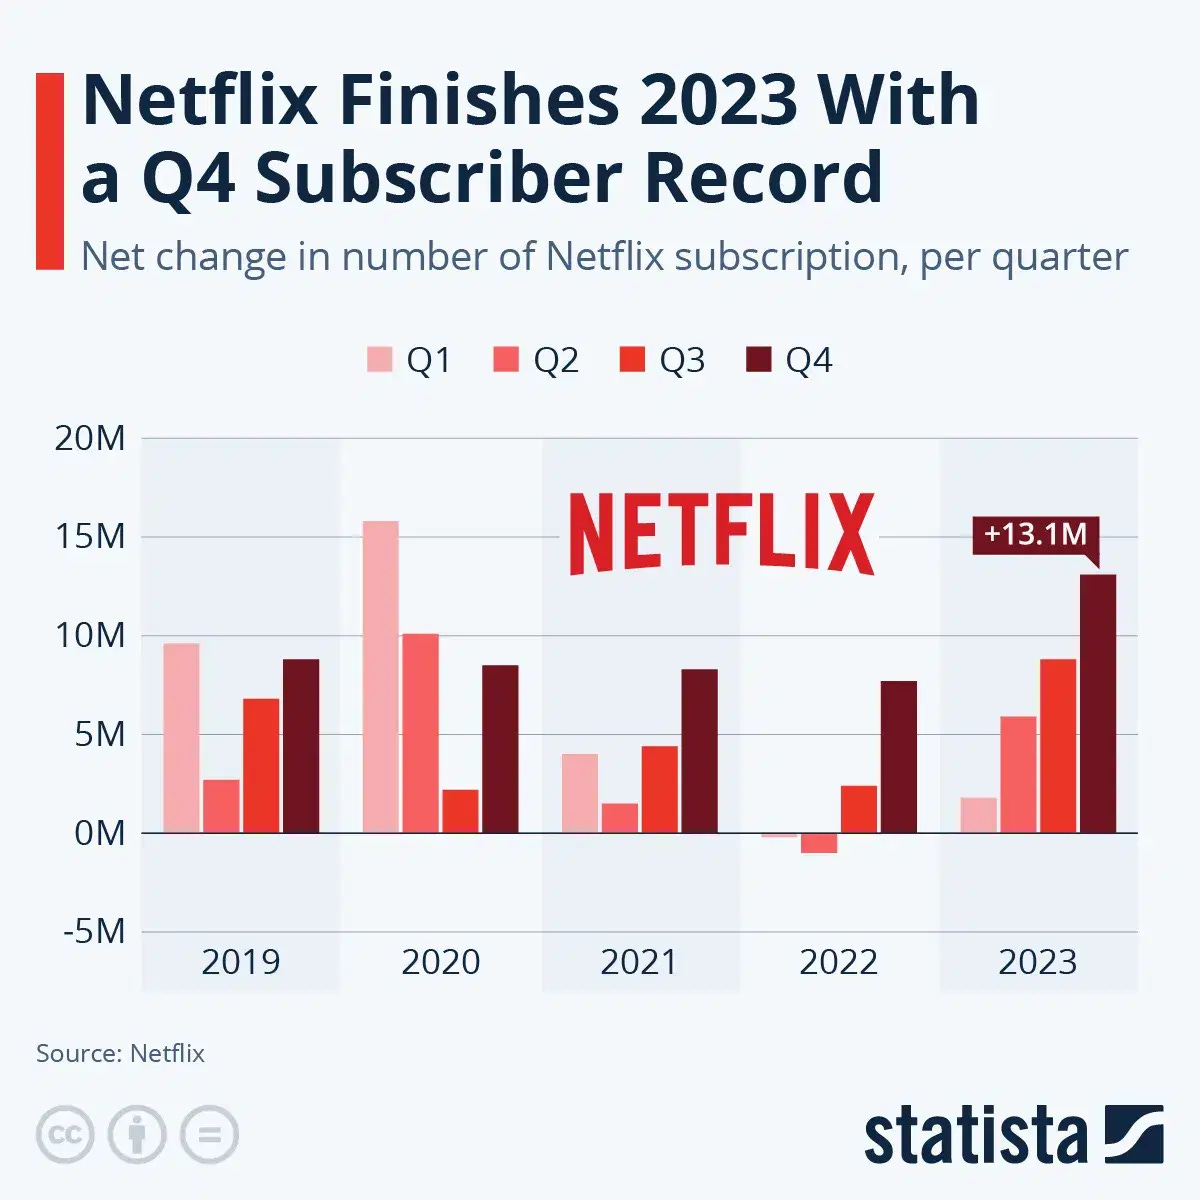 Netflix Finishes 2023 With a Q4 Subscriber Record